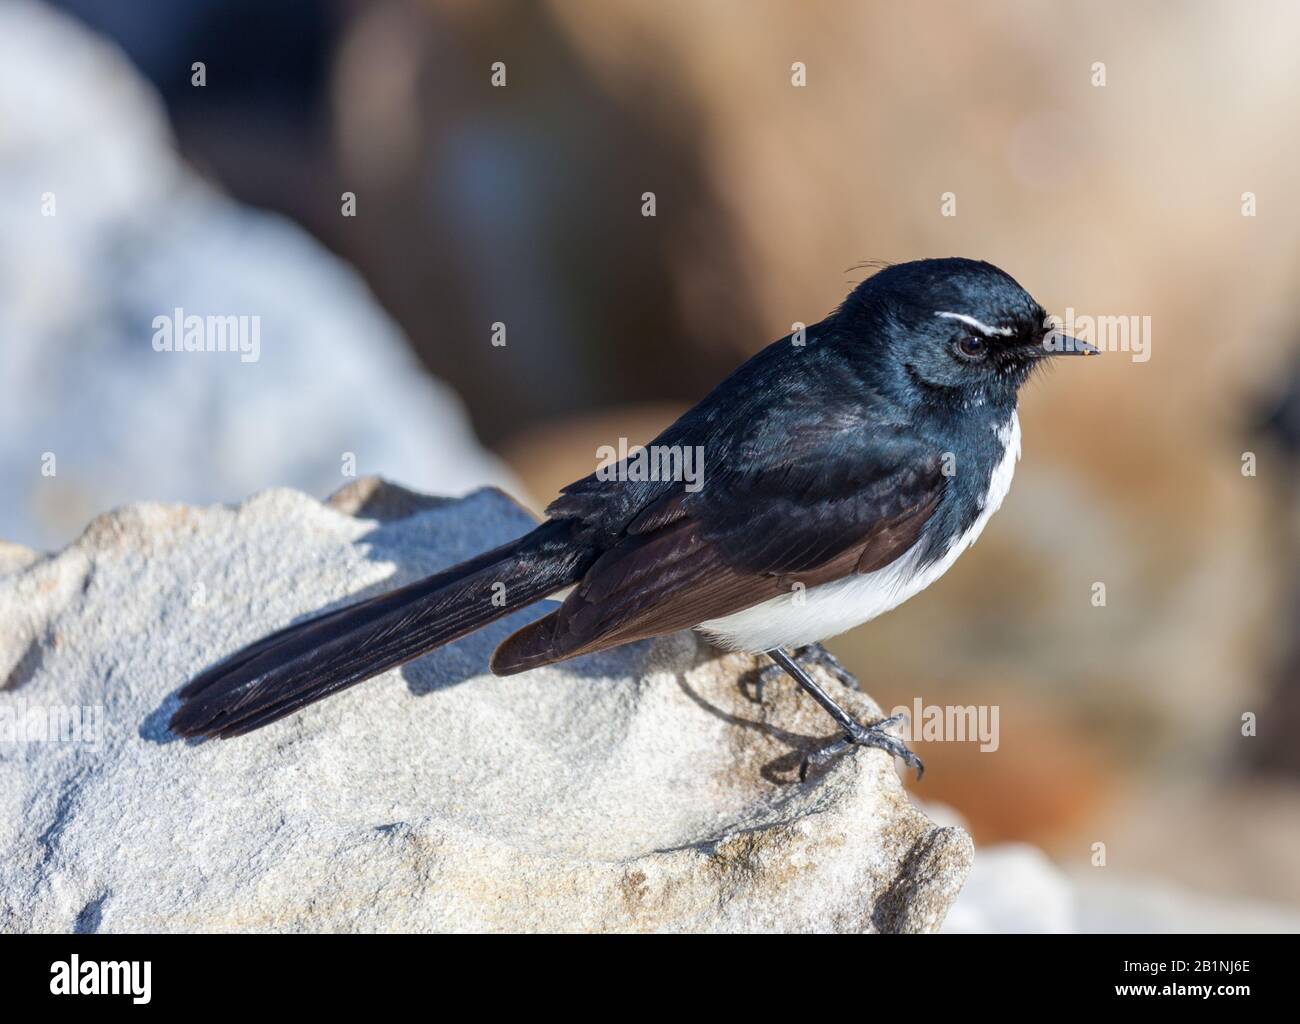 The willie (or willy) wagtail (Rhipidura leucophrys) is a passerine bird native to Australia, New Guinea, the Solomon Islands, the Bismarck Archipelag Stock Photo